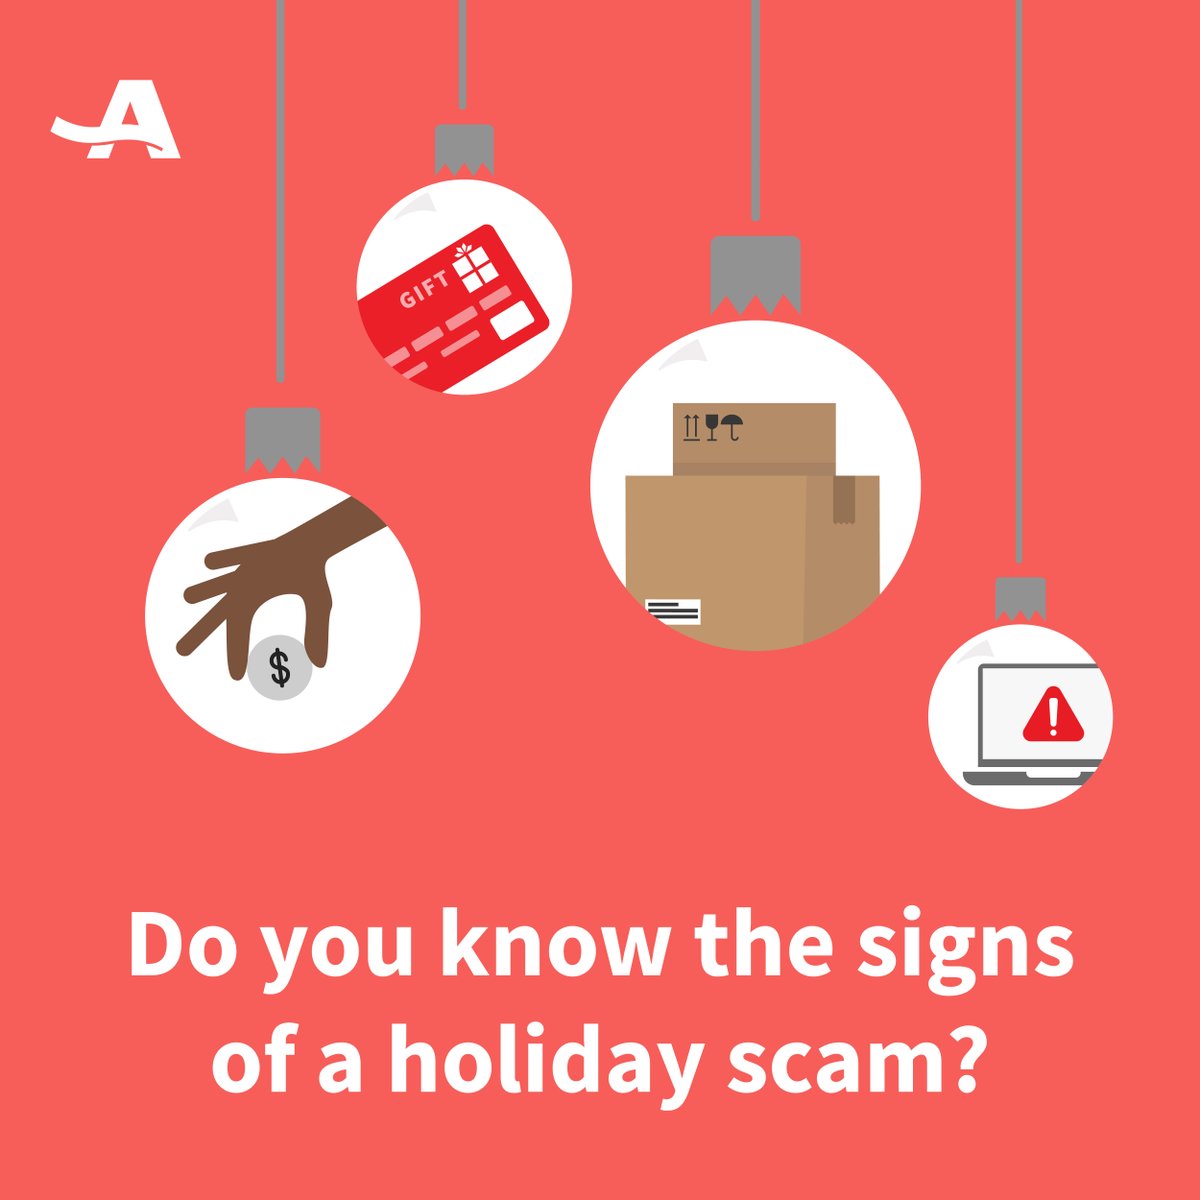 Learn the warning signs of popular holiday scams: spr.ly/6017RTiUZ